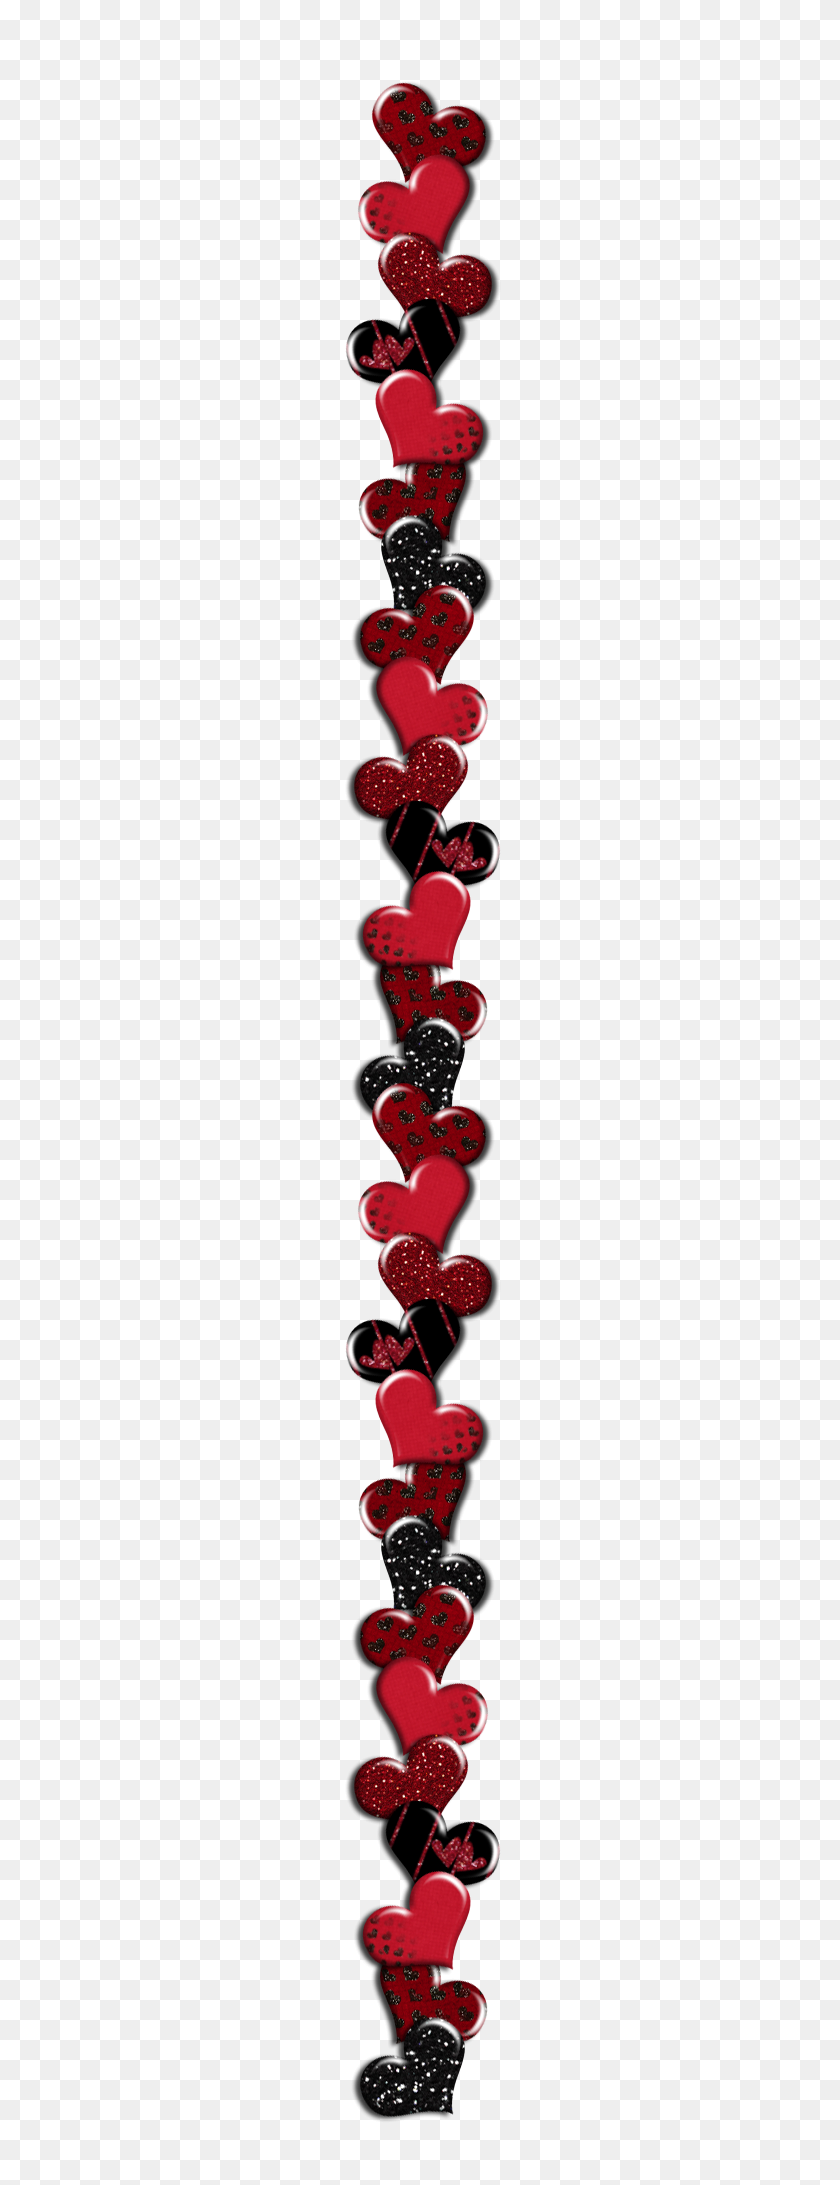 200x2125 Valentine's Day Heart Border Transparent Png Clip Art Image - Valentine Border Clip Art